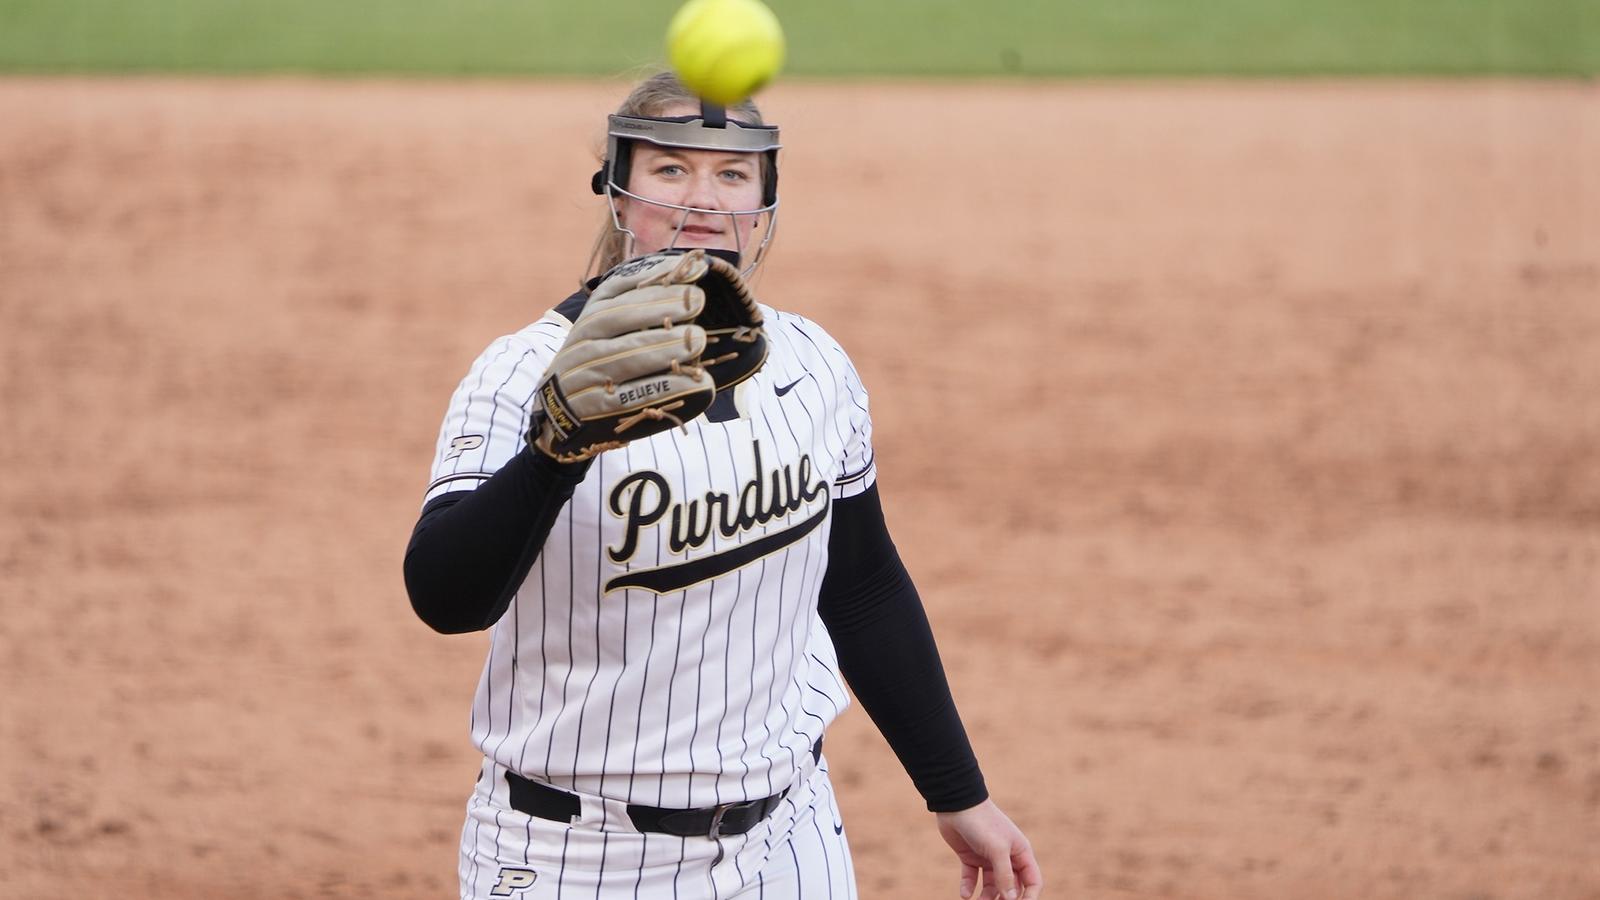 Boilermakers Down Ball State, 6-1